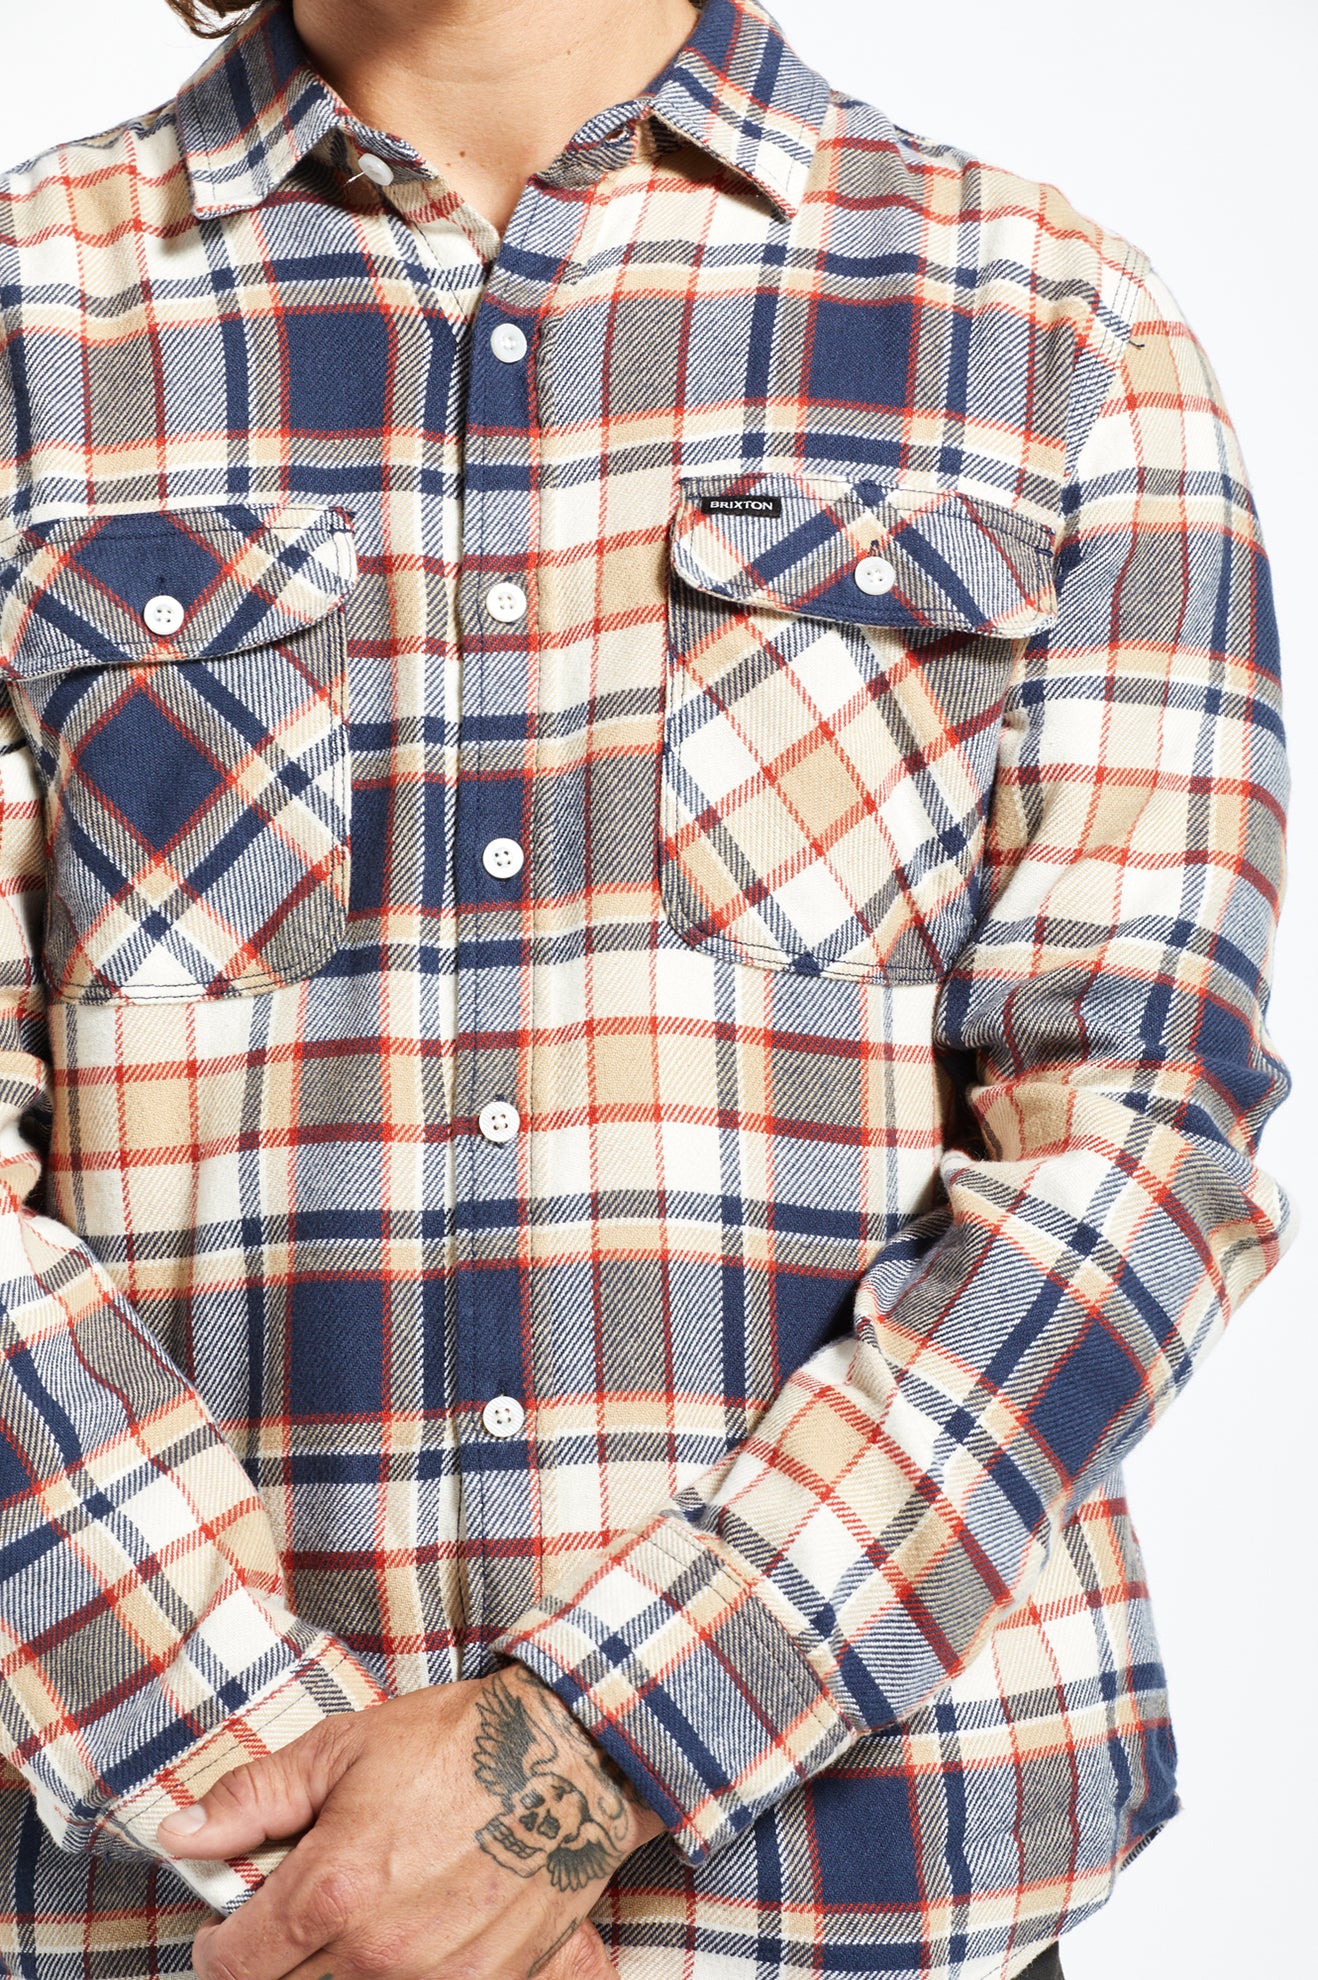 Bowery L/S Flannel - Washed Navy/Barn Red/Off White – Brixton